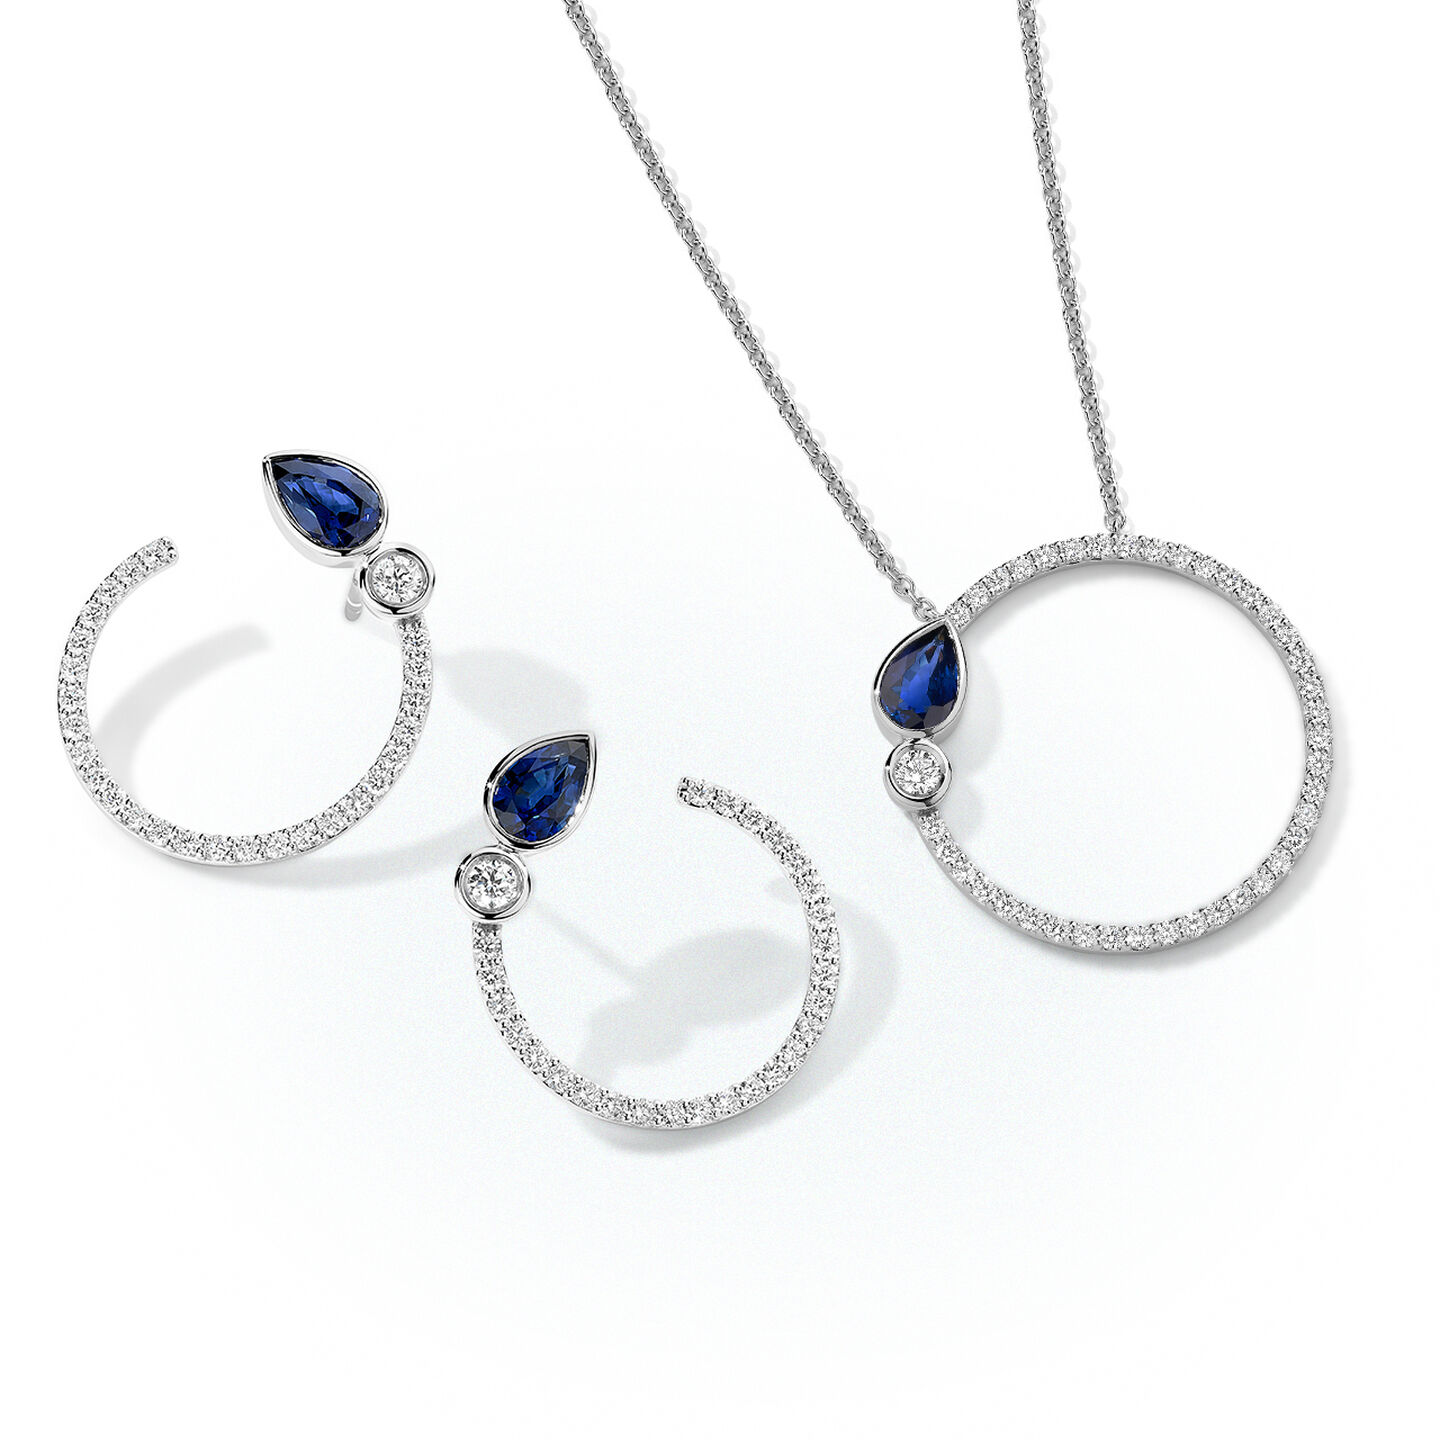 Diamond and Sapphire Earrings and pendant necklace